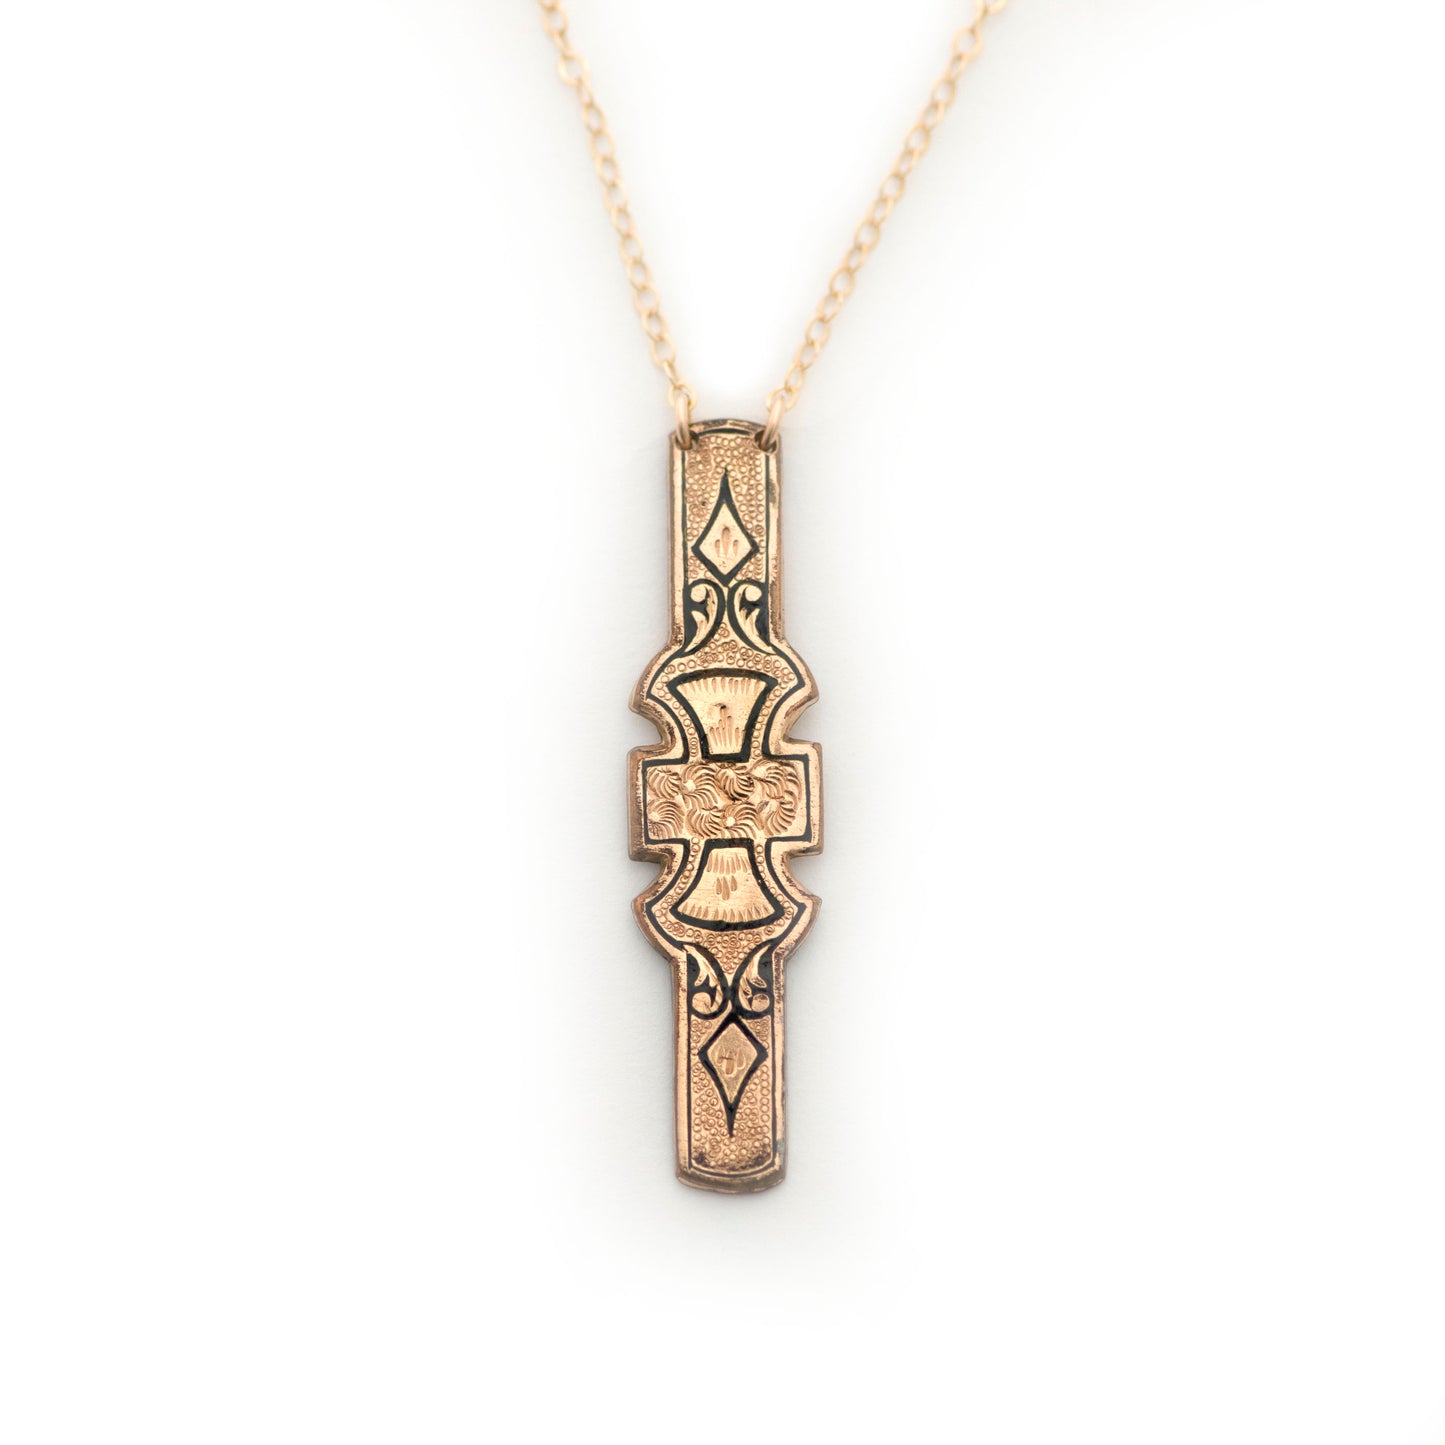 An antique vertical bar pin conversion pendant necklace on an all white background. Pendant is gold filled and decorated with black enamel tracery, also known as taille d'epargne.